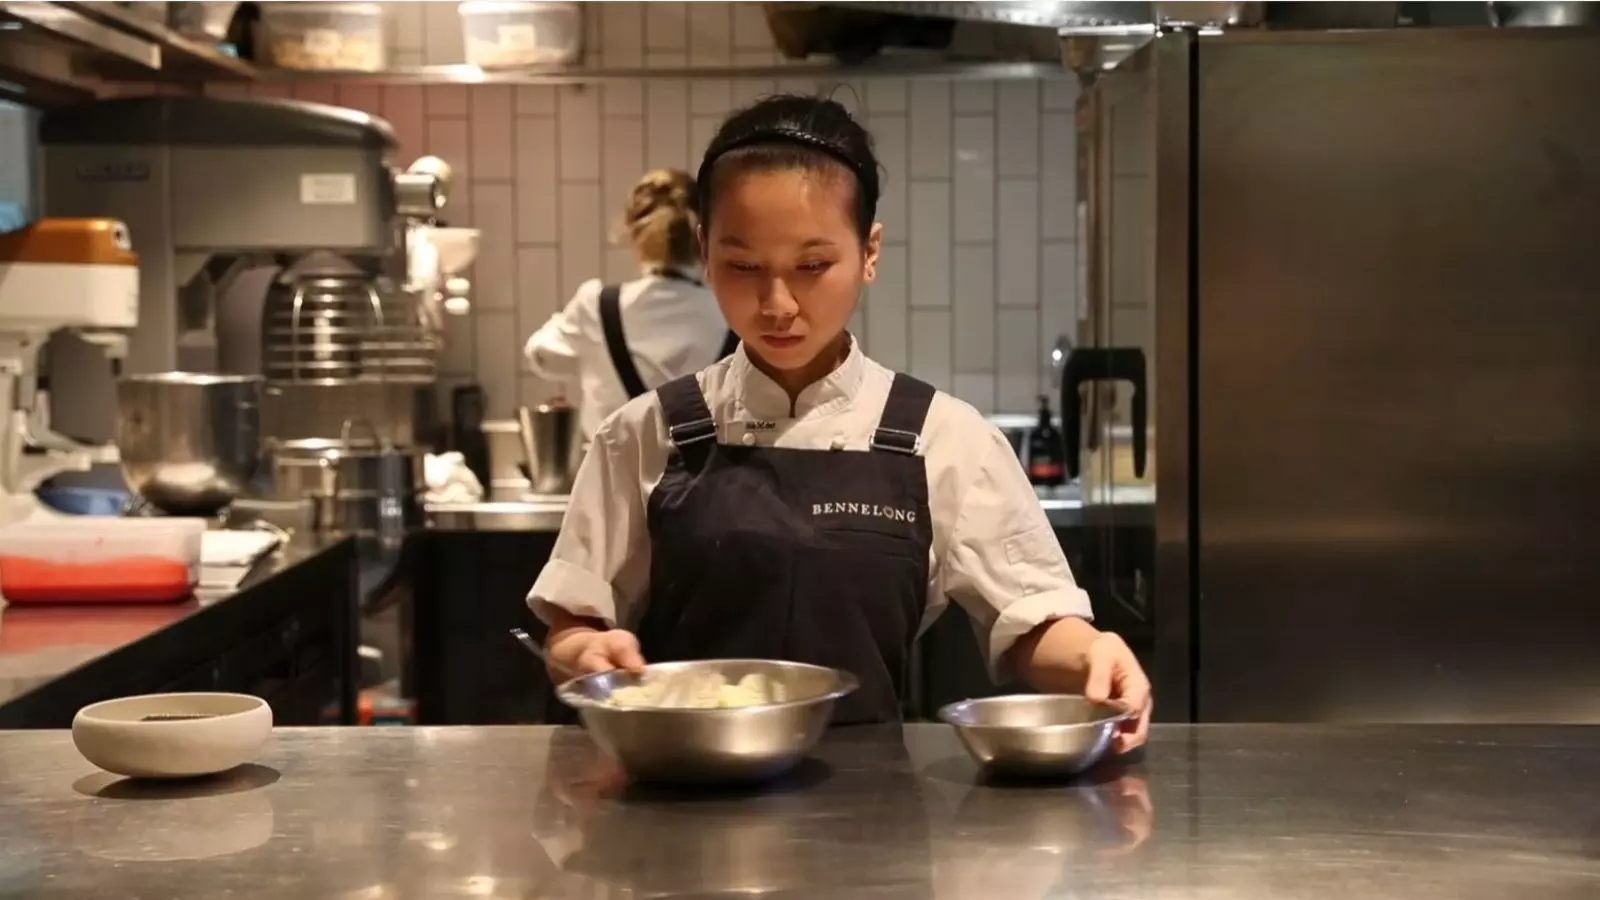 A female chef preparing food in the kitchen.